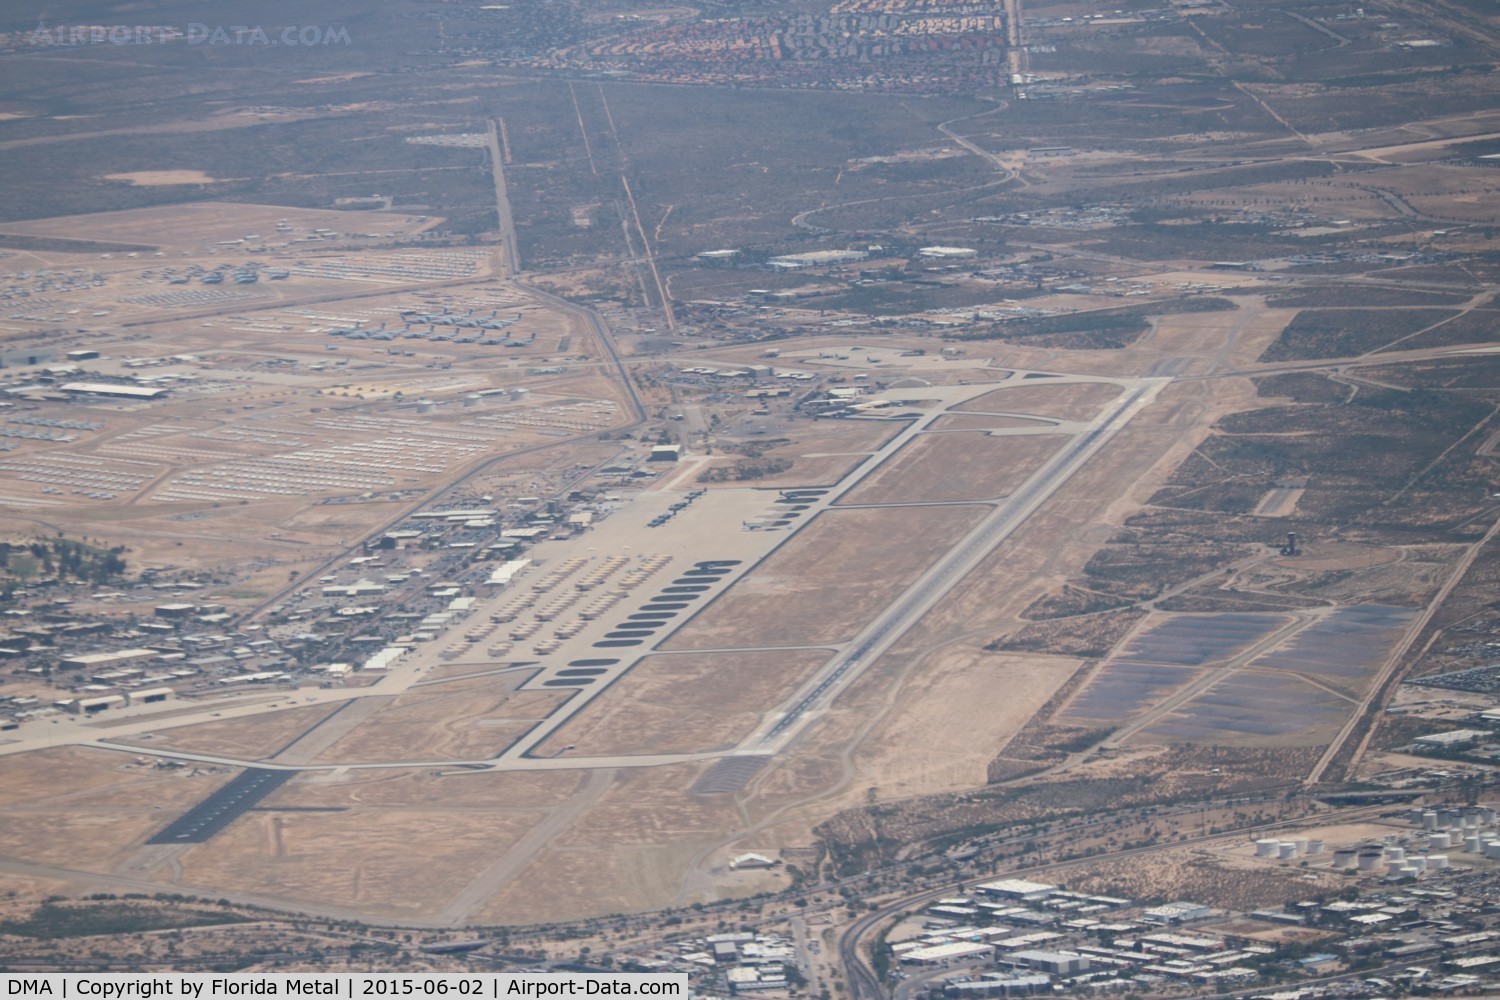 Davis Monthan Afb Airport (DMA) - departing Tucson over Davis Monthan